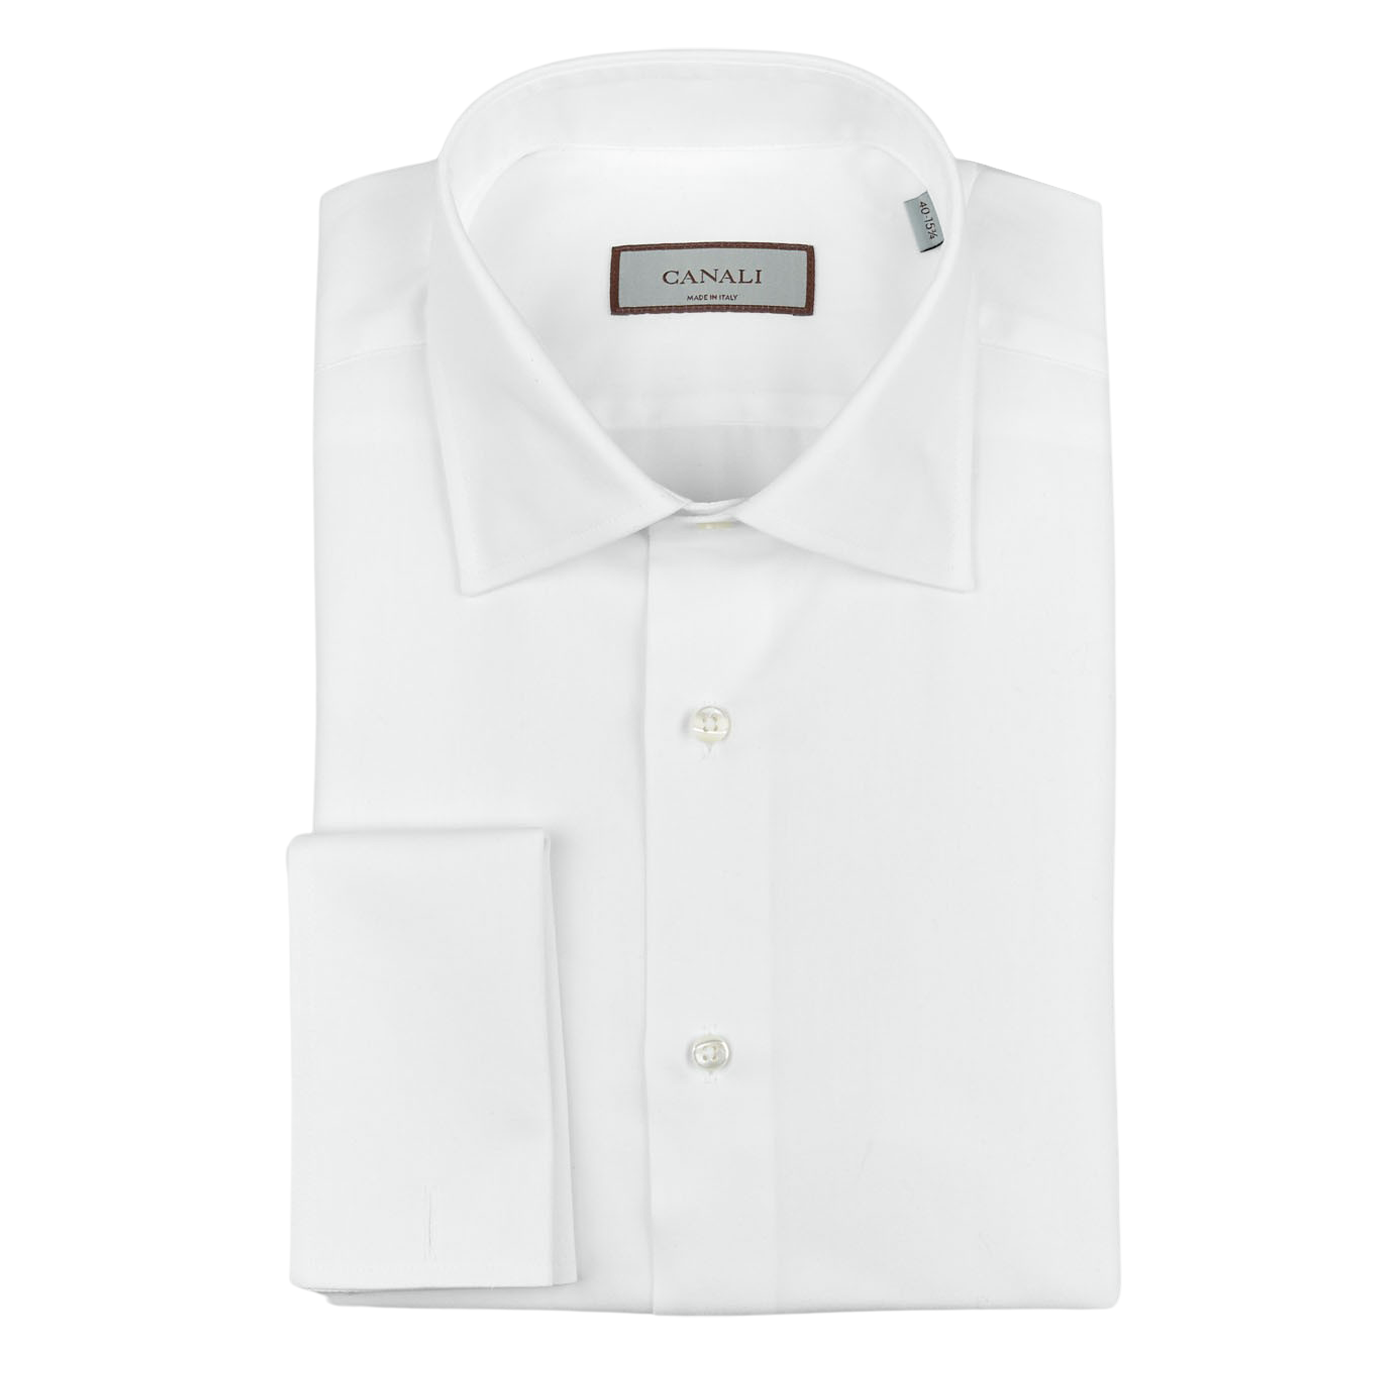 A Canali White Cotton Double Cuff Plain Dress Shirt with a collar and cuffs.